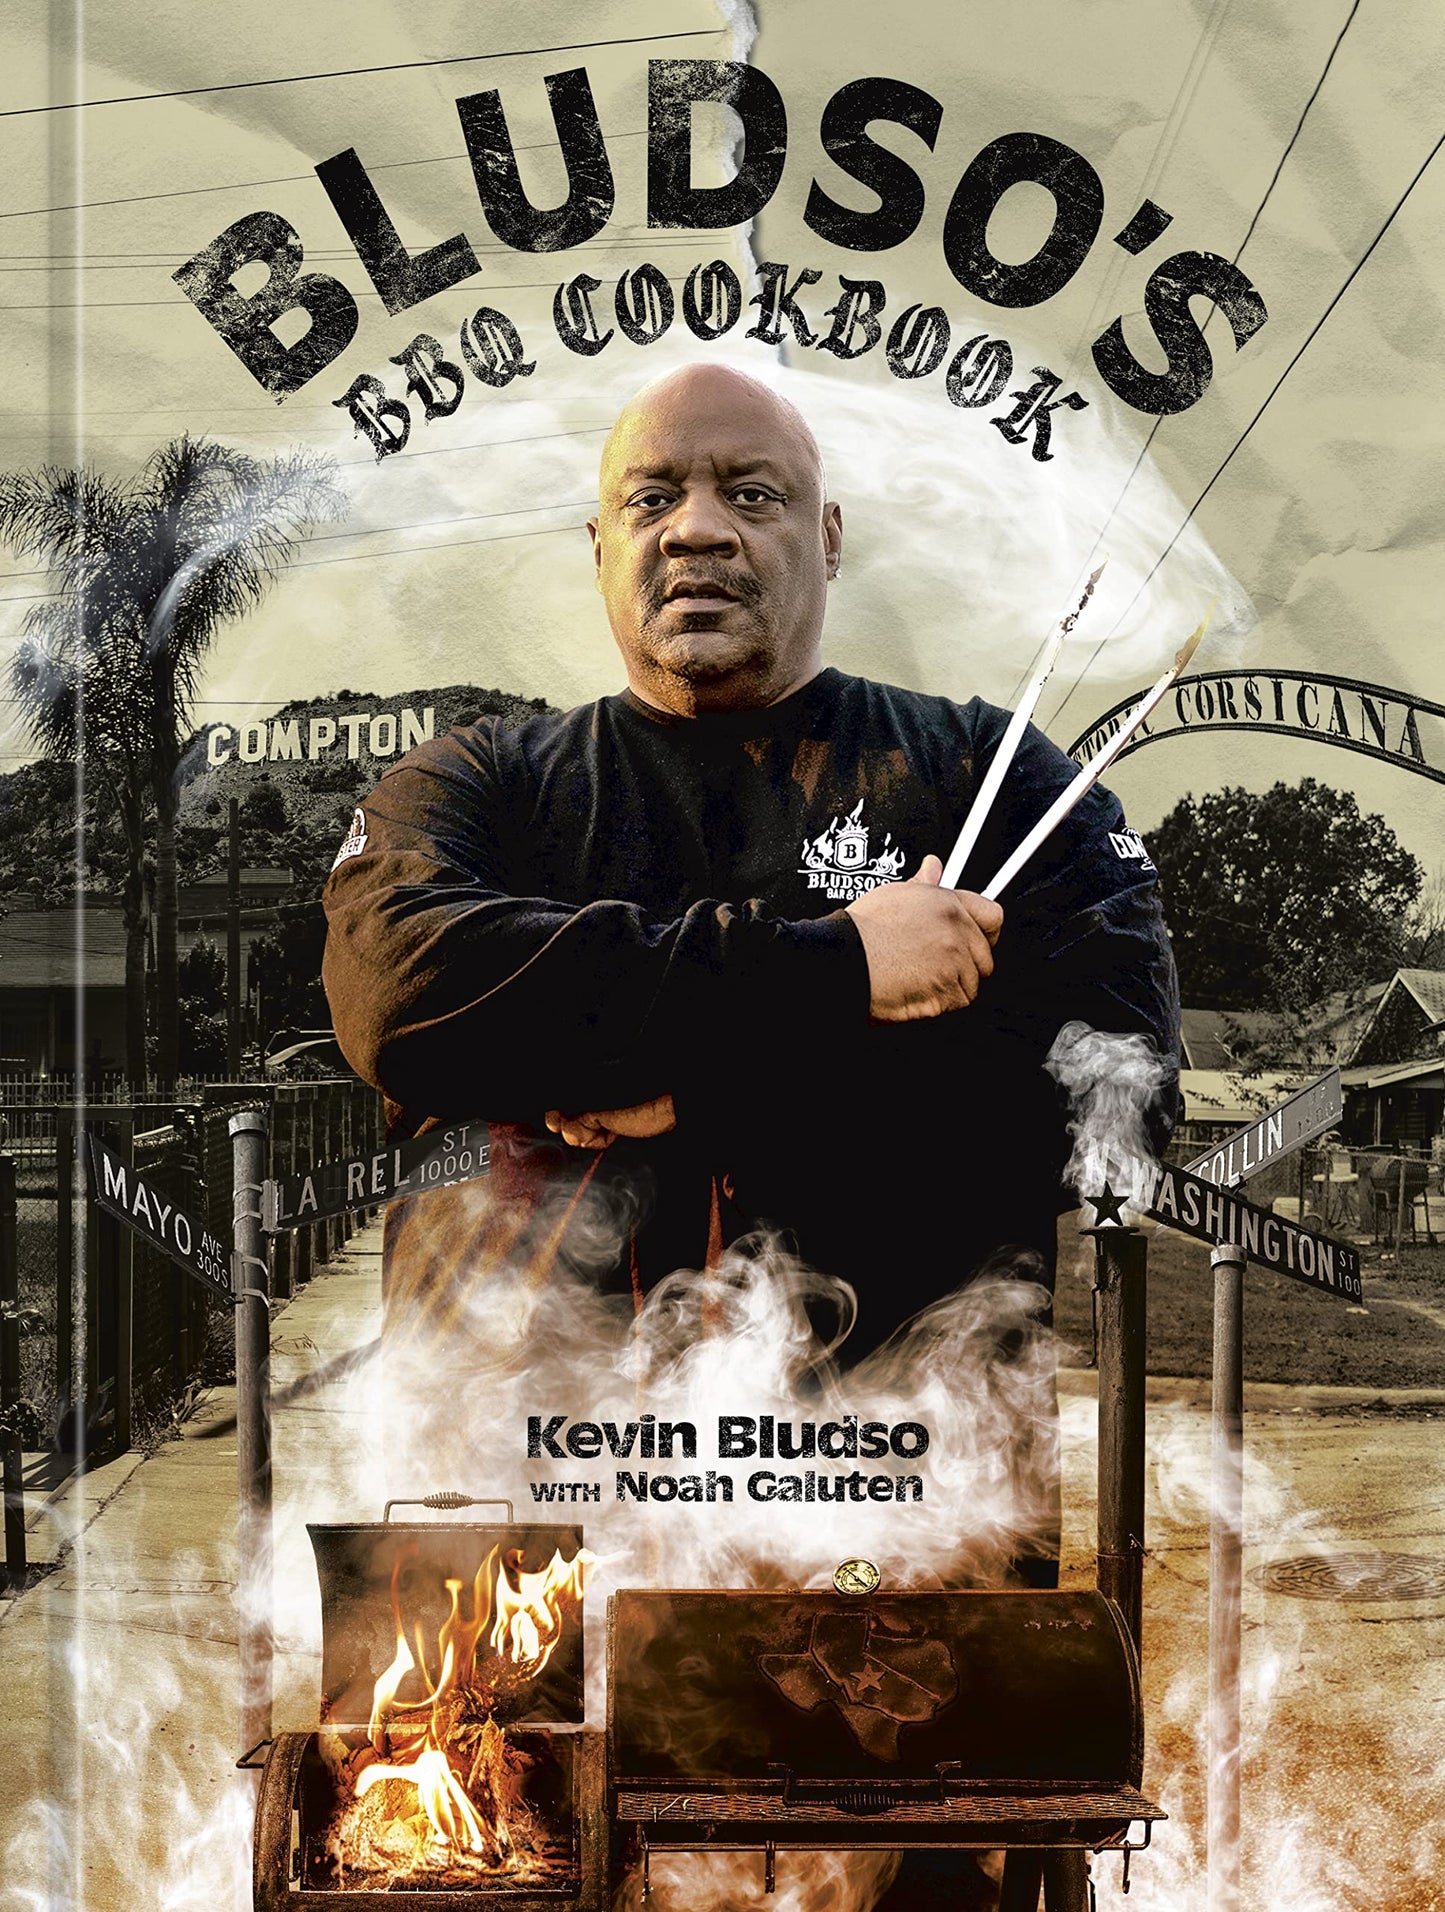 Bludso's BBQ Cookbook // A Family Affair in Smoke and Soul